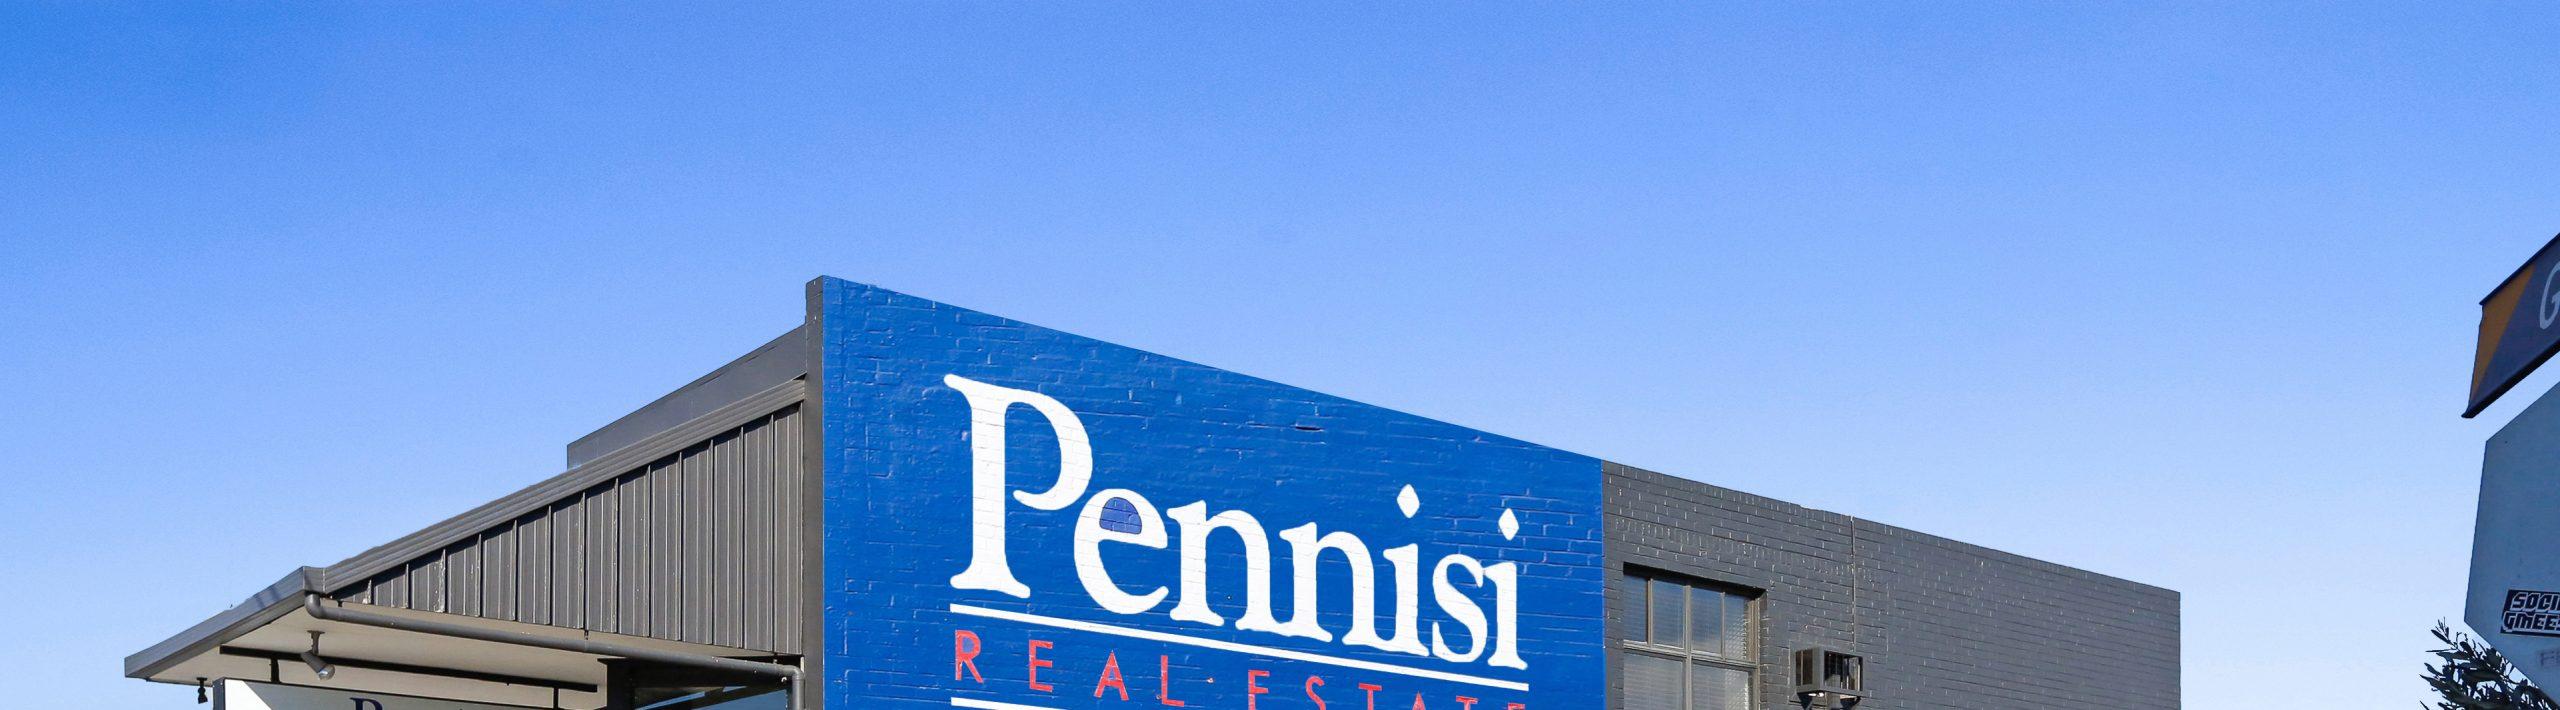 Picture of the Pennisi Real Estate building